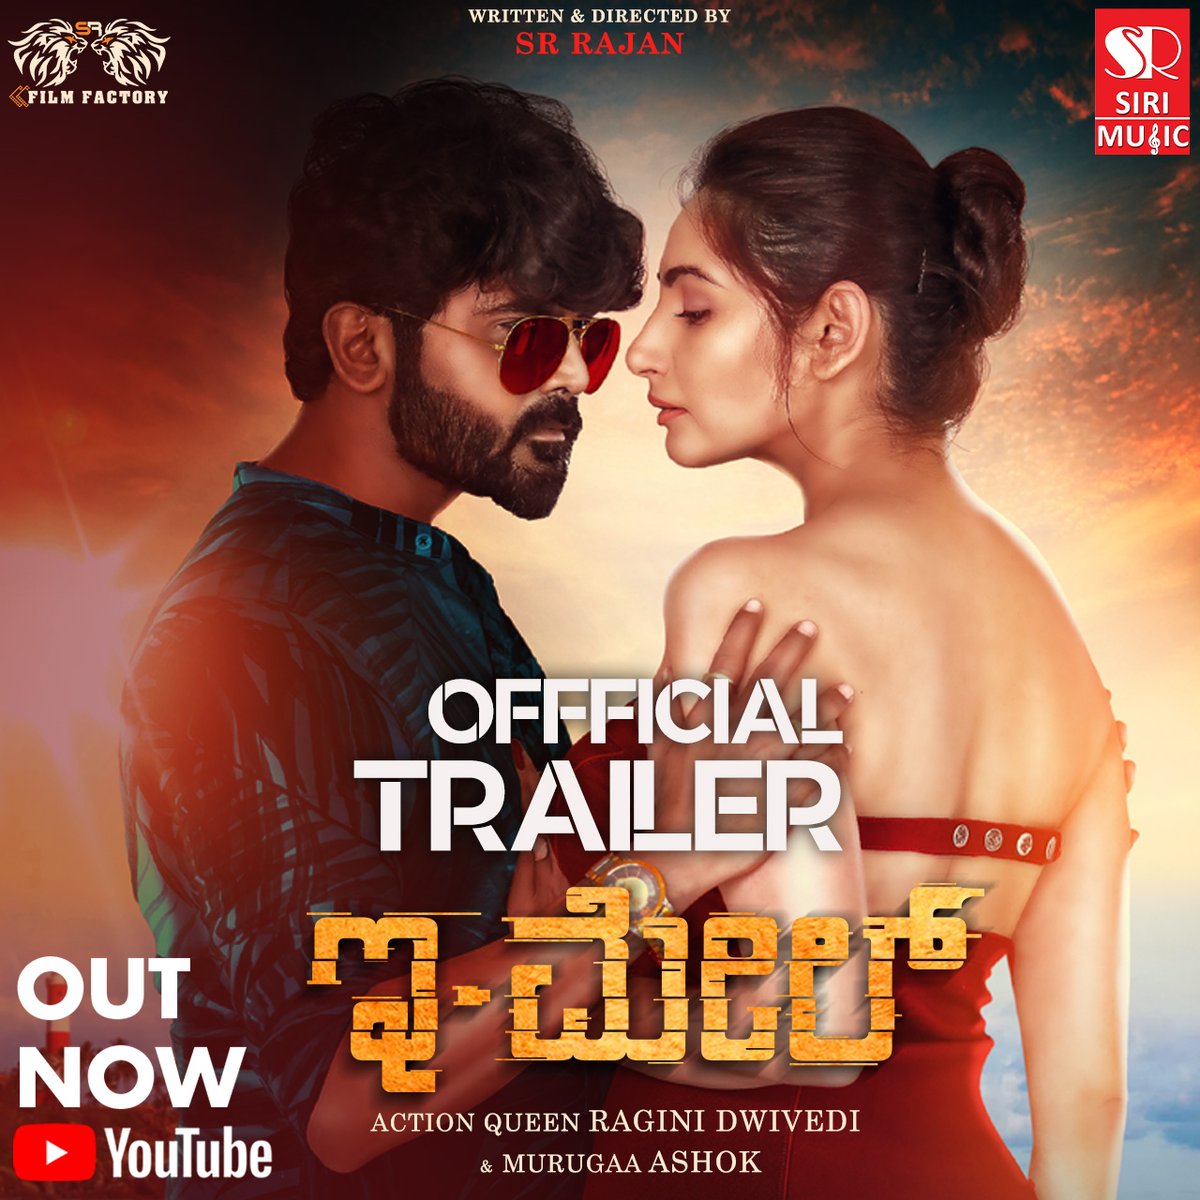 EMail | Official Kannada Movie Trailer ⭐ Action Queen @raginidwivedi24 and @ashokactor is now live on Siri Music YouTube Channel : ▶ youtu.be/2WQTU6a0sK8 Director - S R Rajan @SRFilmFactory #email #cindrela